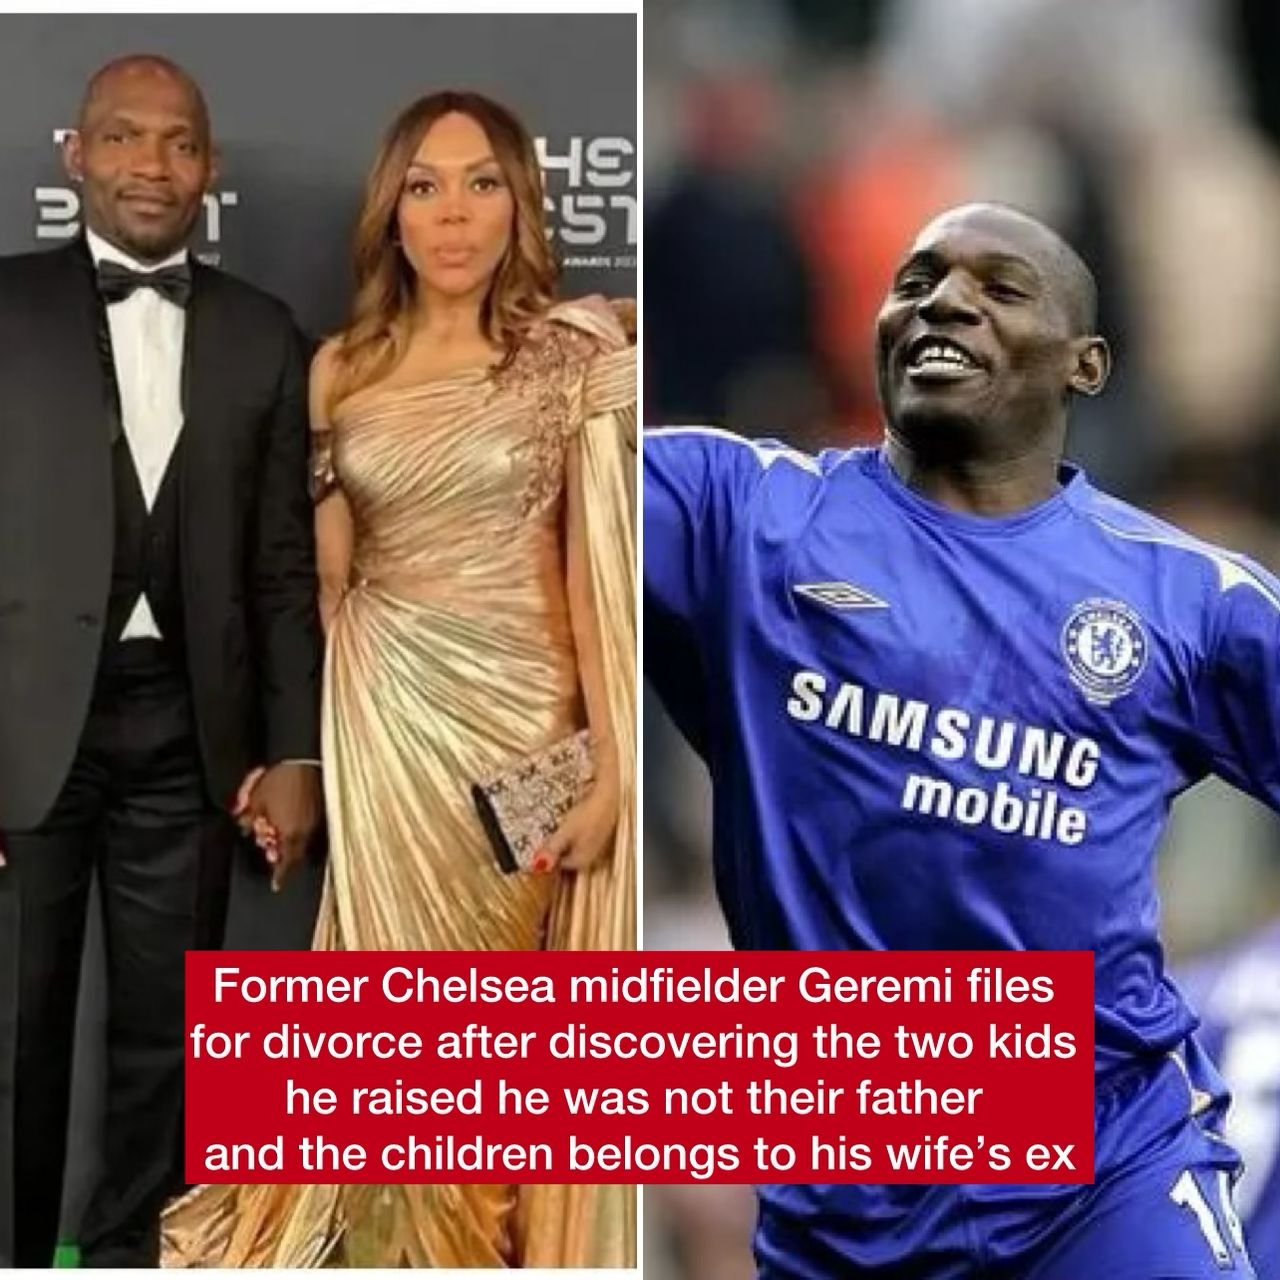 Former Chelsea midfielder Geremi files for divorce after discovering the two kids he raised he was not their father and the children belongs to his wife’s ex